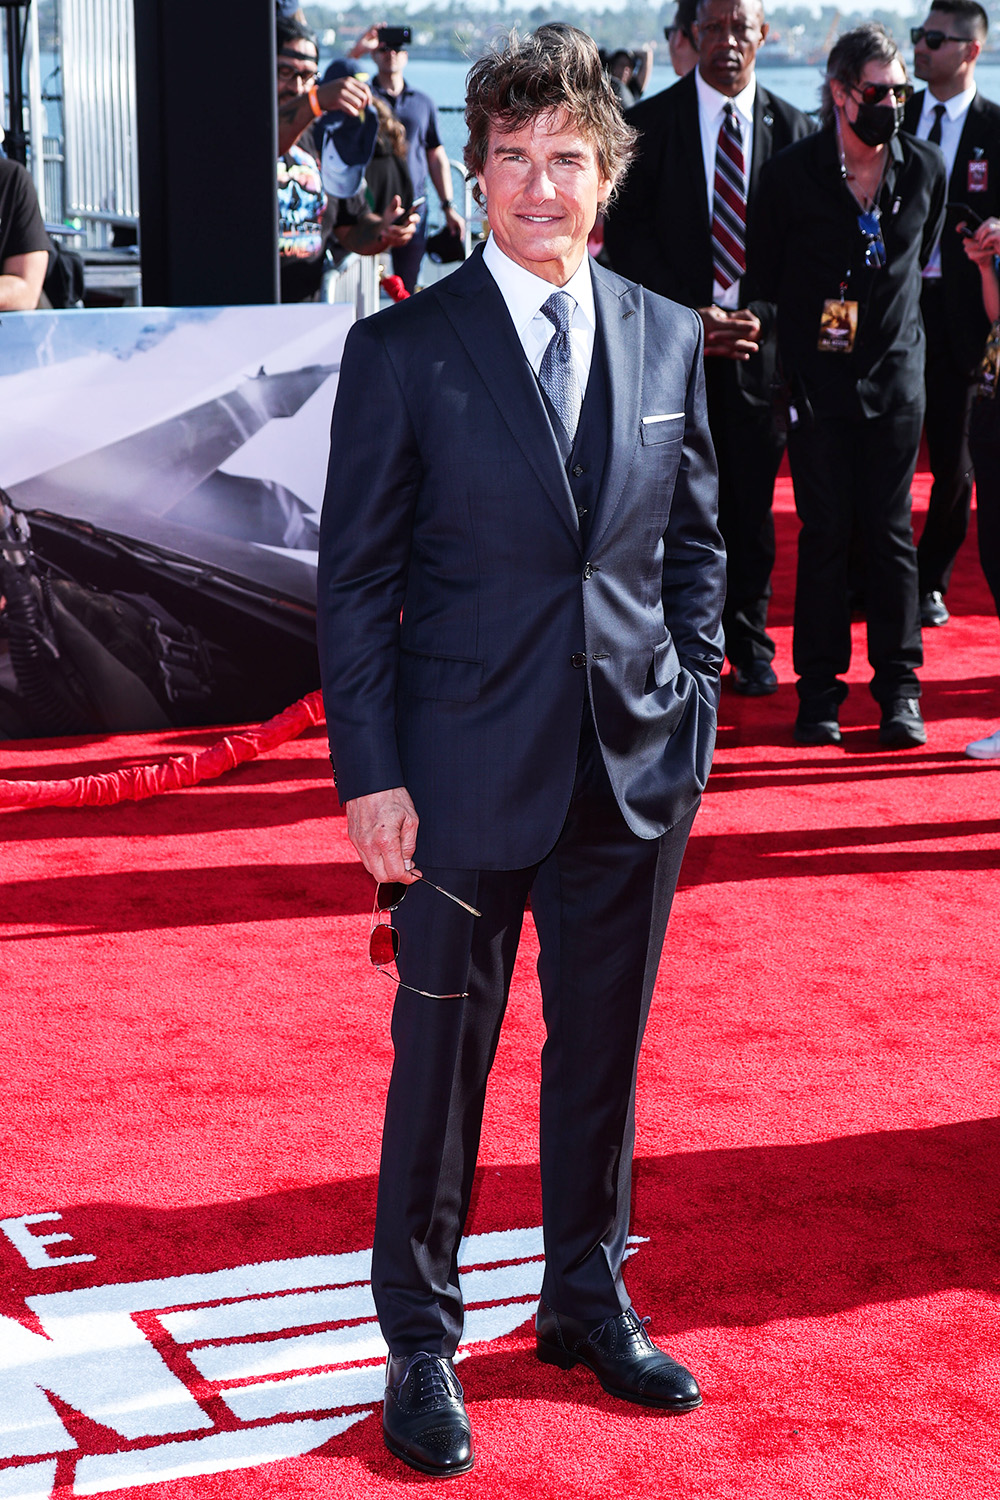 <p>Tom Cruise was so handsome in a navy blue suit at the world premiere of ‘Top Gun: Maverick’ on May 4, 2022. The event was held at the USS Midway Museum in San Diego, California.</p>